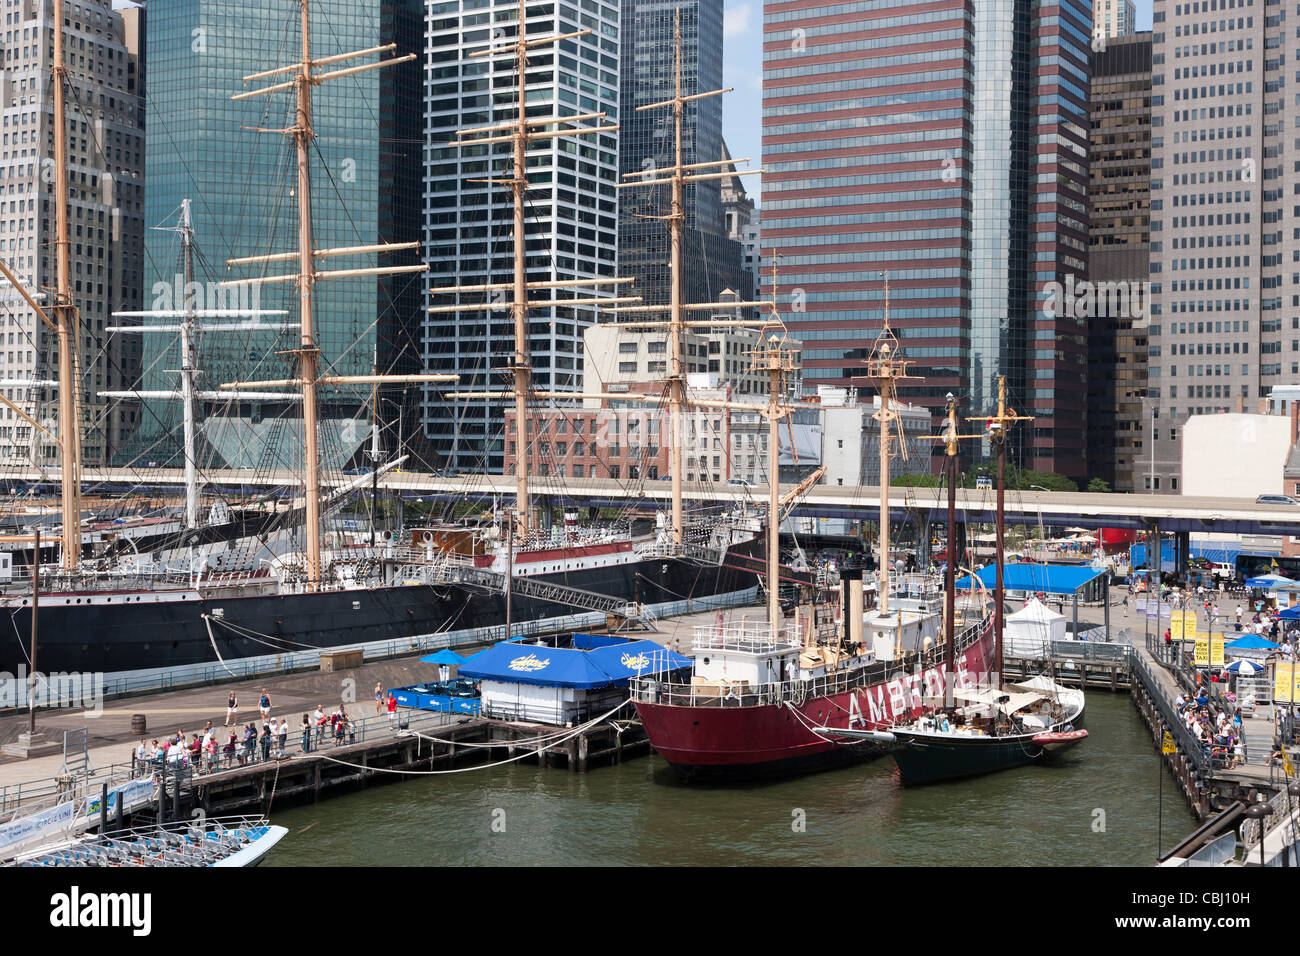 Ambrose light ship and other vintage ships docked at the South Street Seaport Museum in New York City. Stock Photo